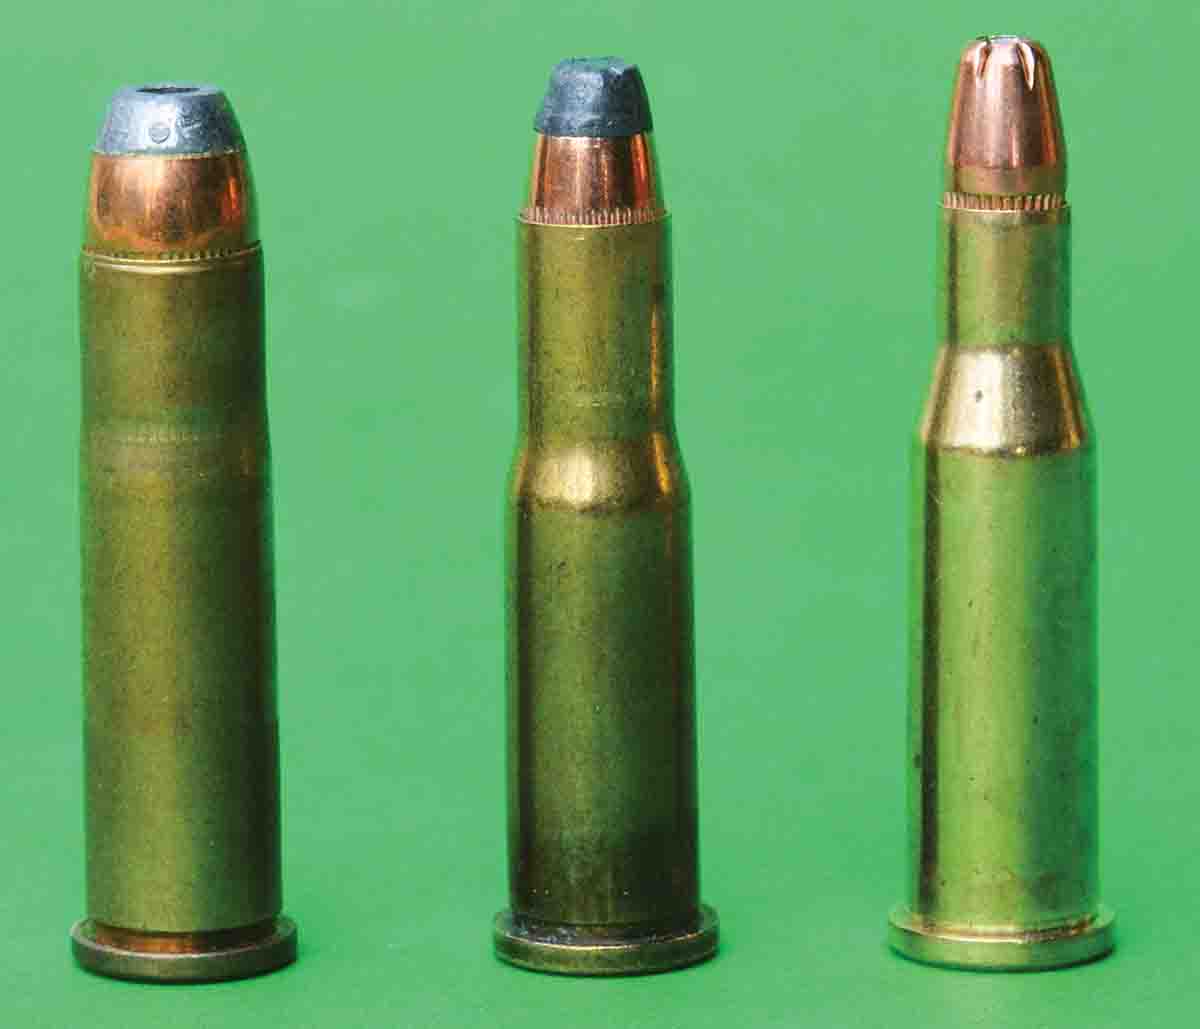 The .218 Bee (right) is based on the .32-20 (left) and .25-20 Winchester (center) case, but is slightly longer, features a different shoulder position and is thicker to withstand higher pressures.